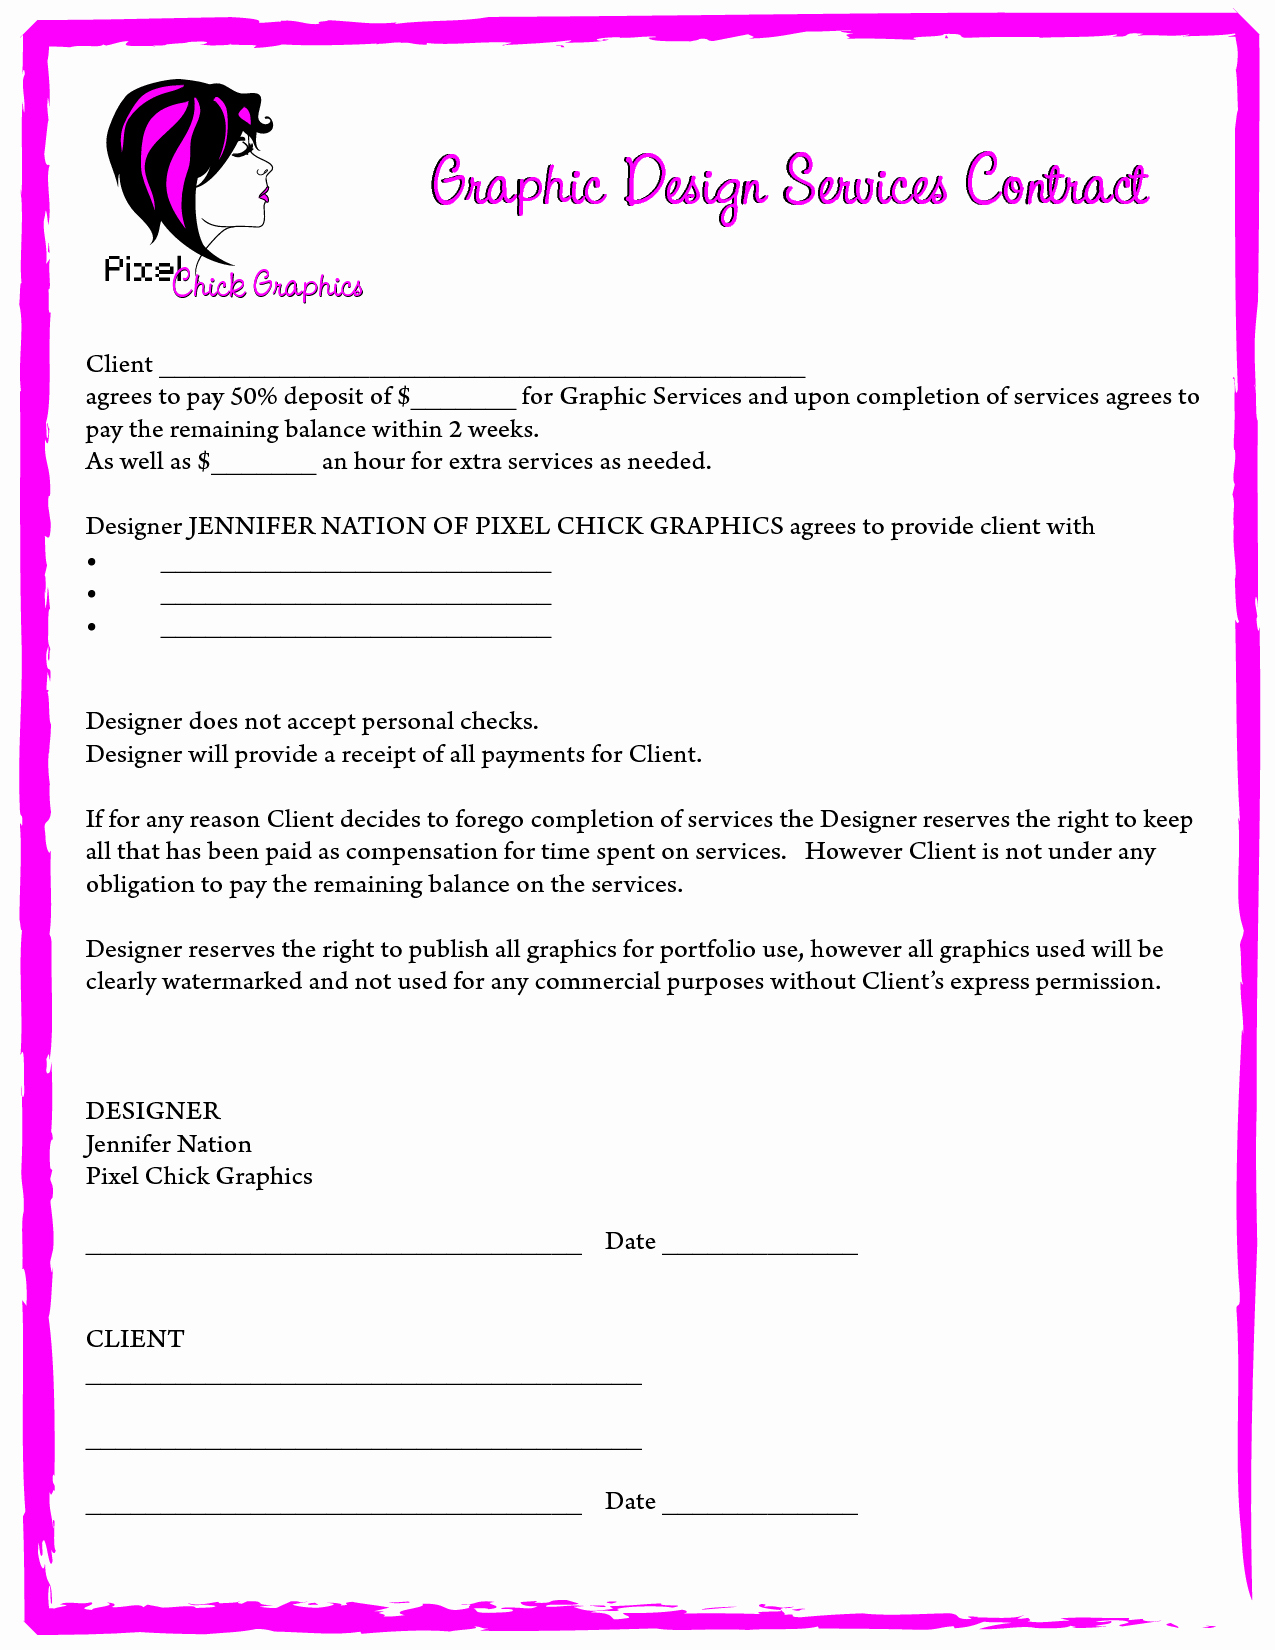 Graphic Design Contract Template Pdf Awesome Graphic Designer Contract